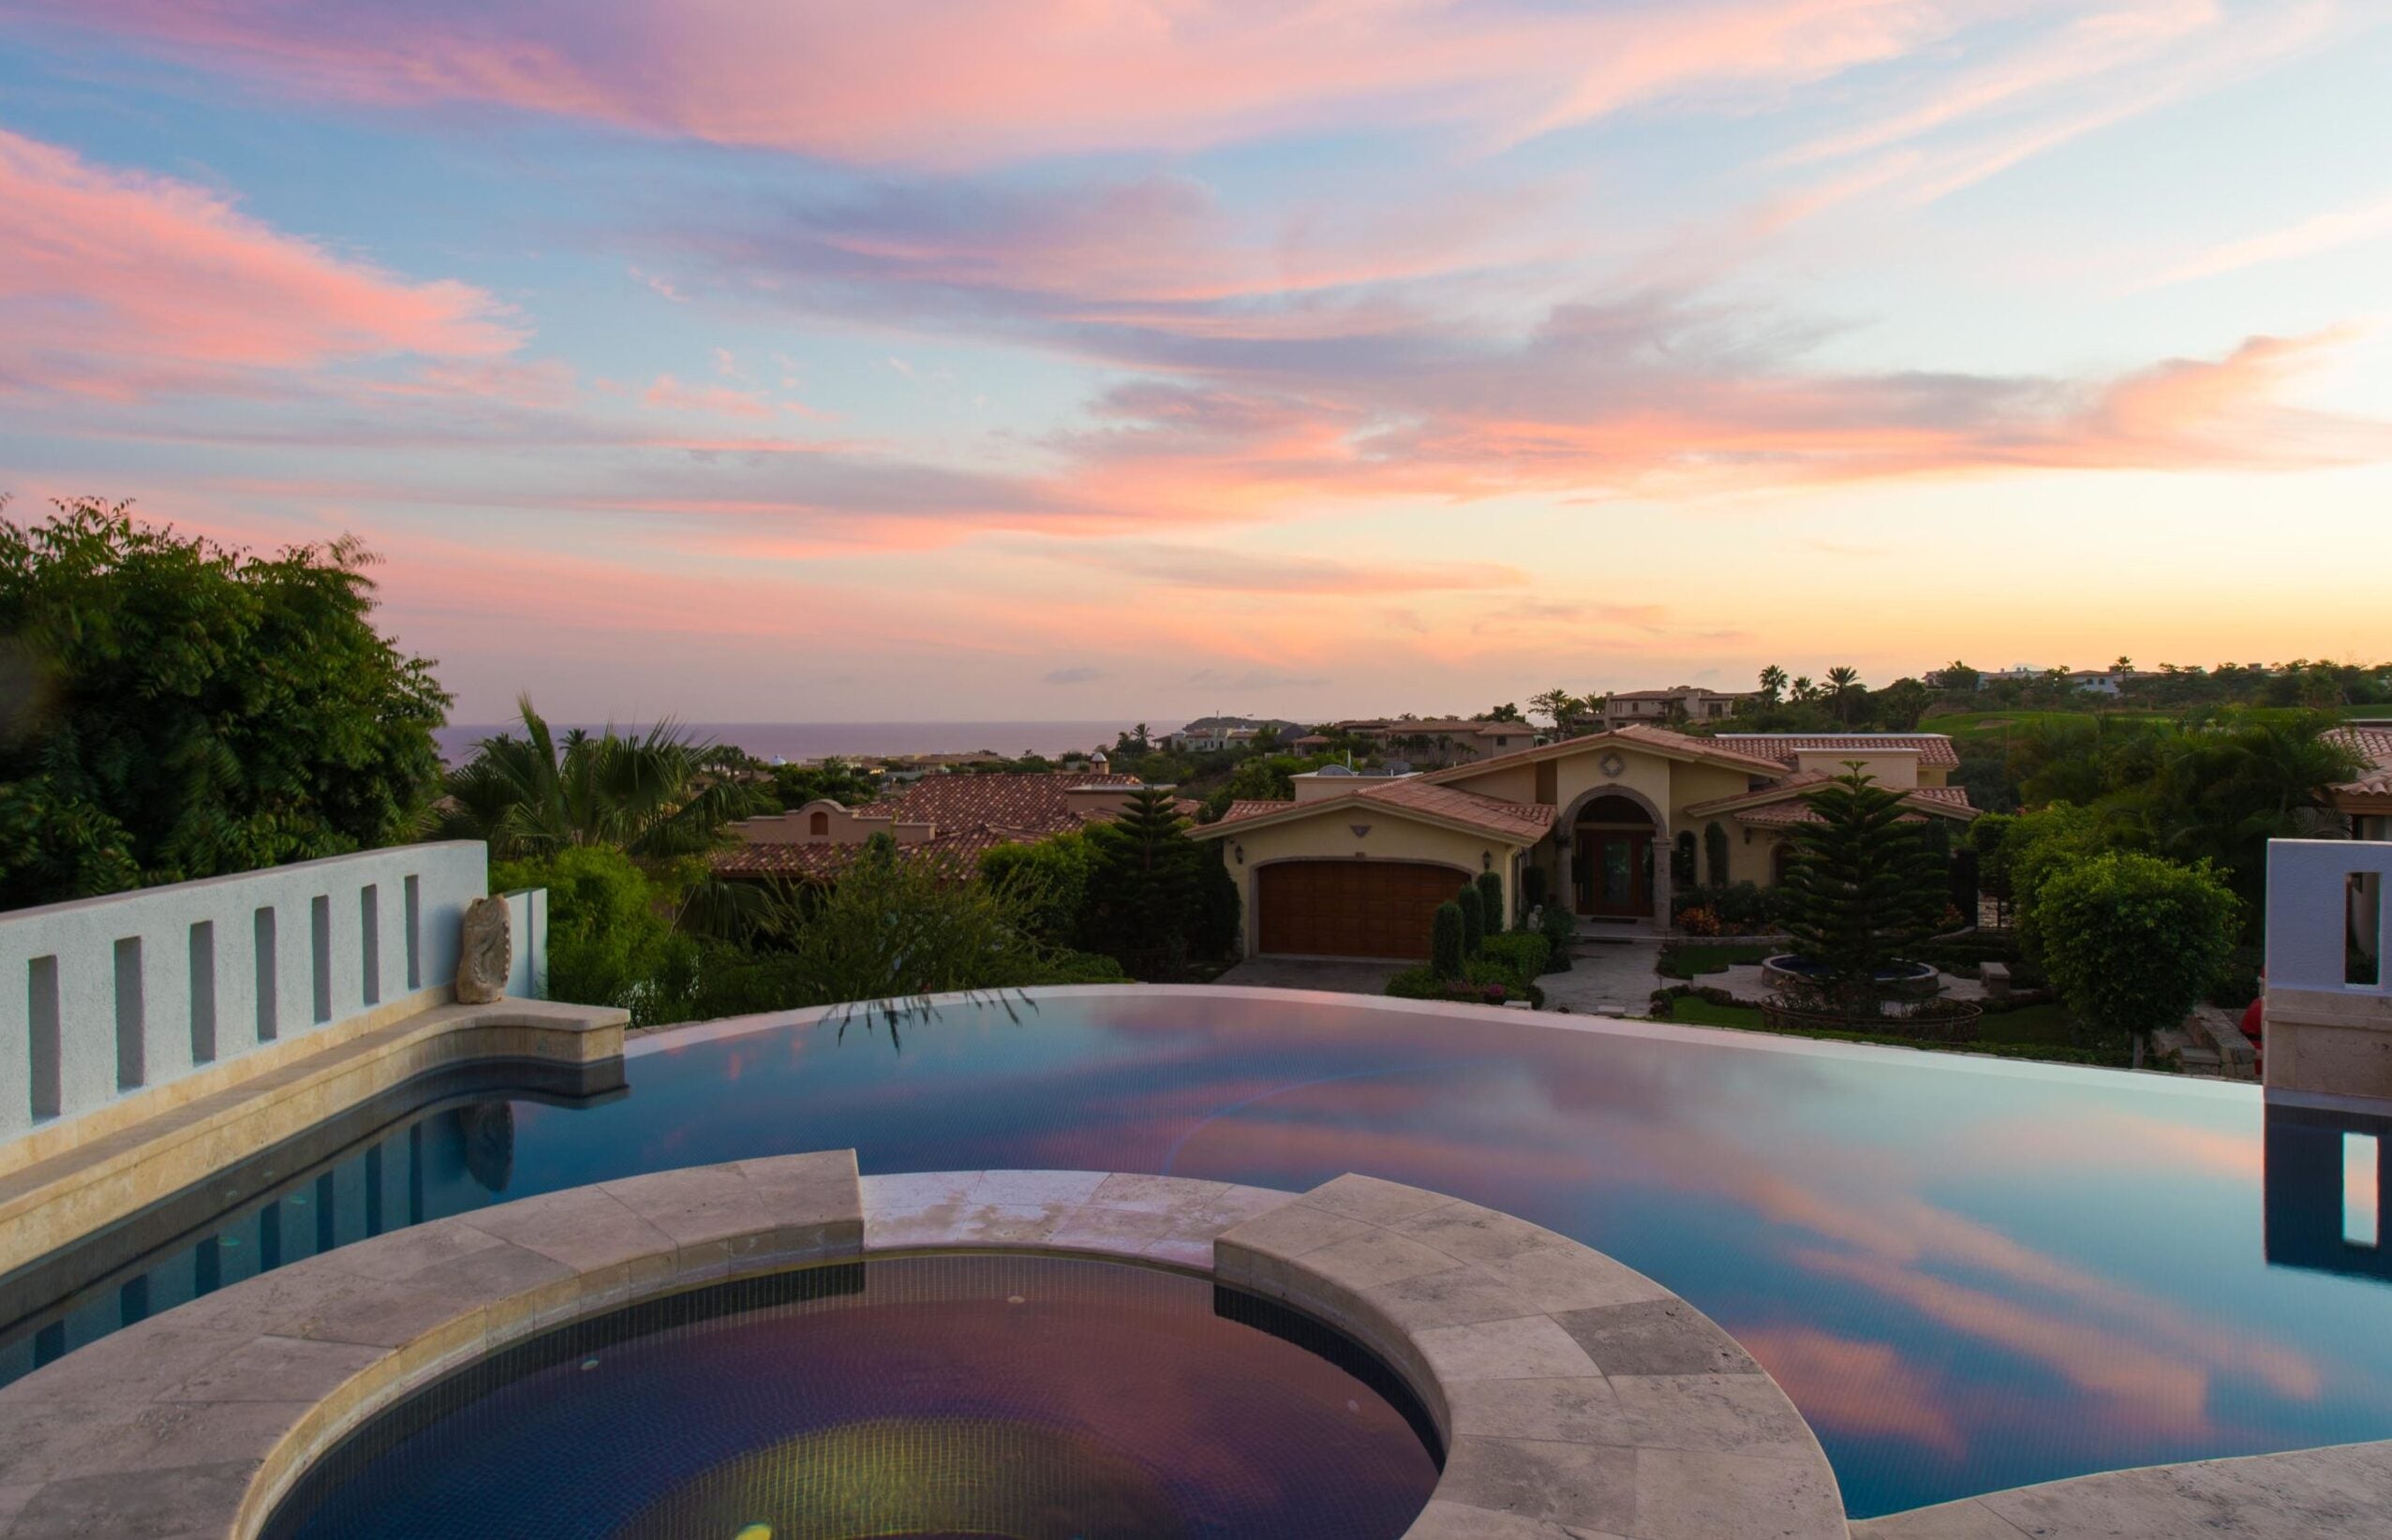 Sponsored: How to Enjoy the Private Villa Lifestyle in Los Cabos